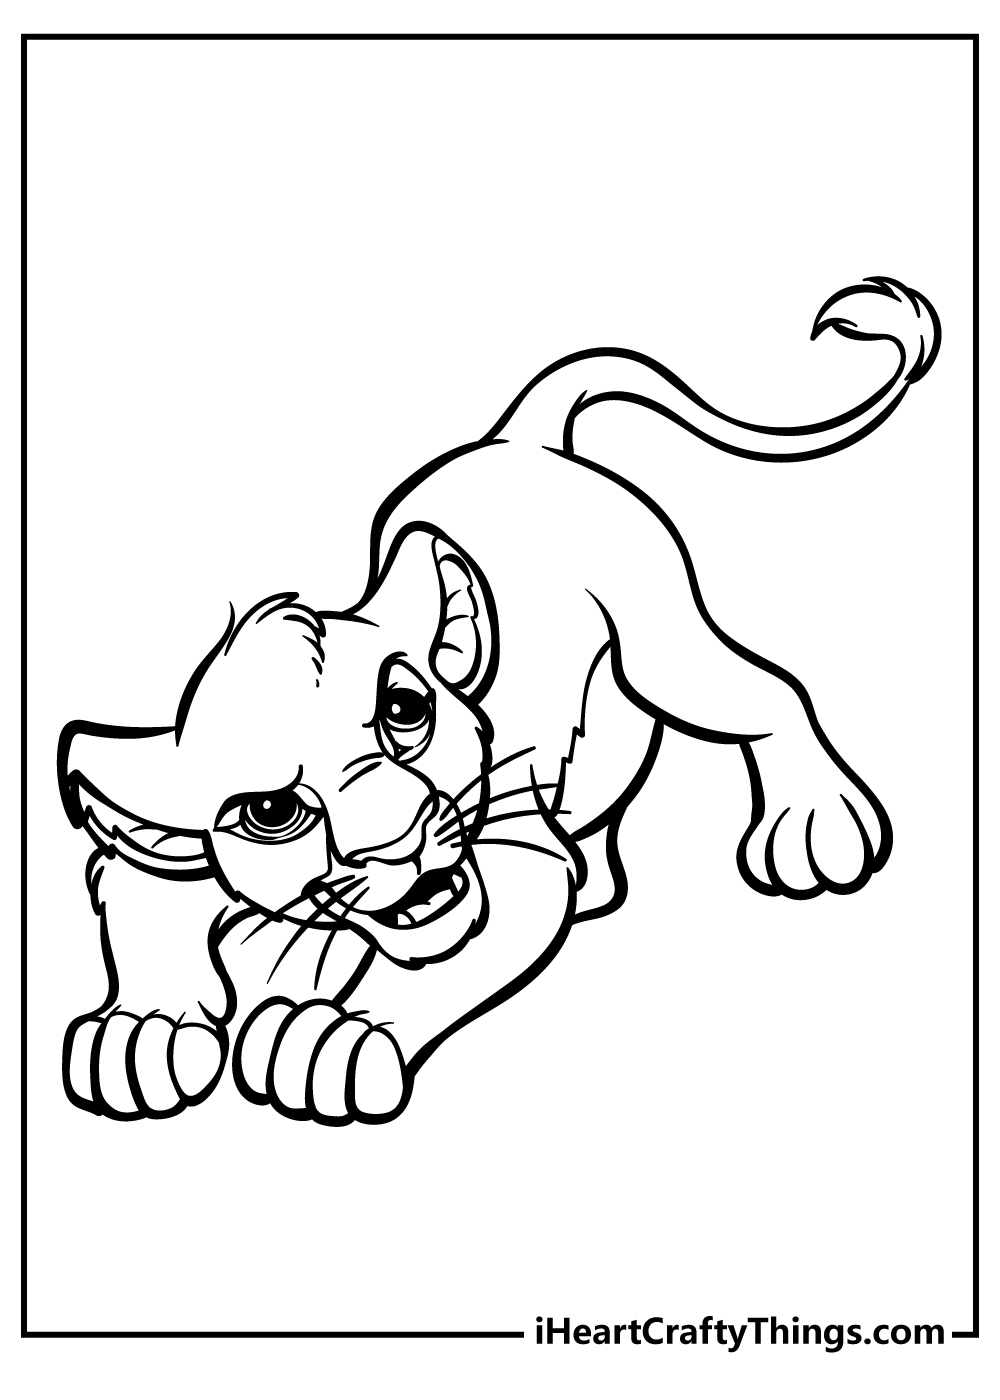 Lion King Coloring Pages for preschoolers free printable